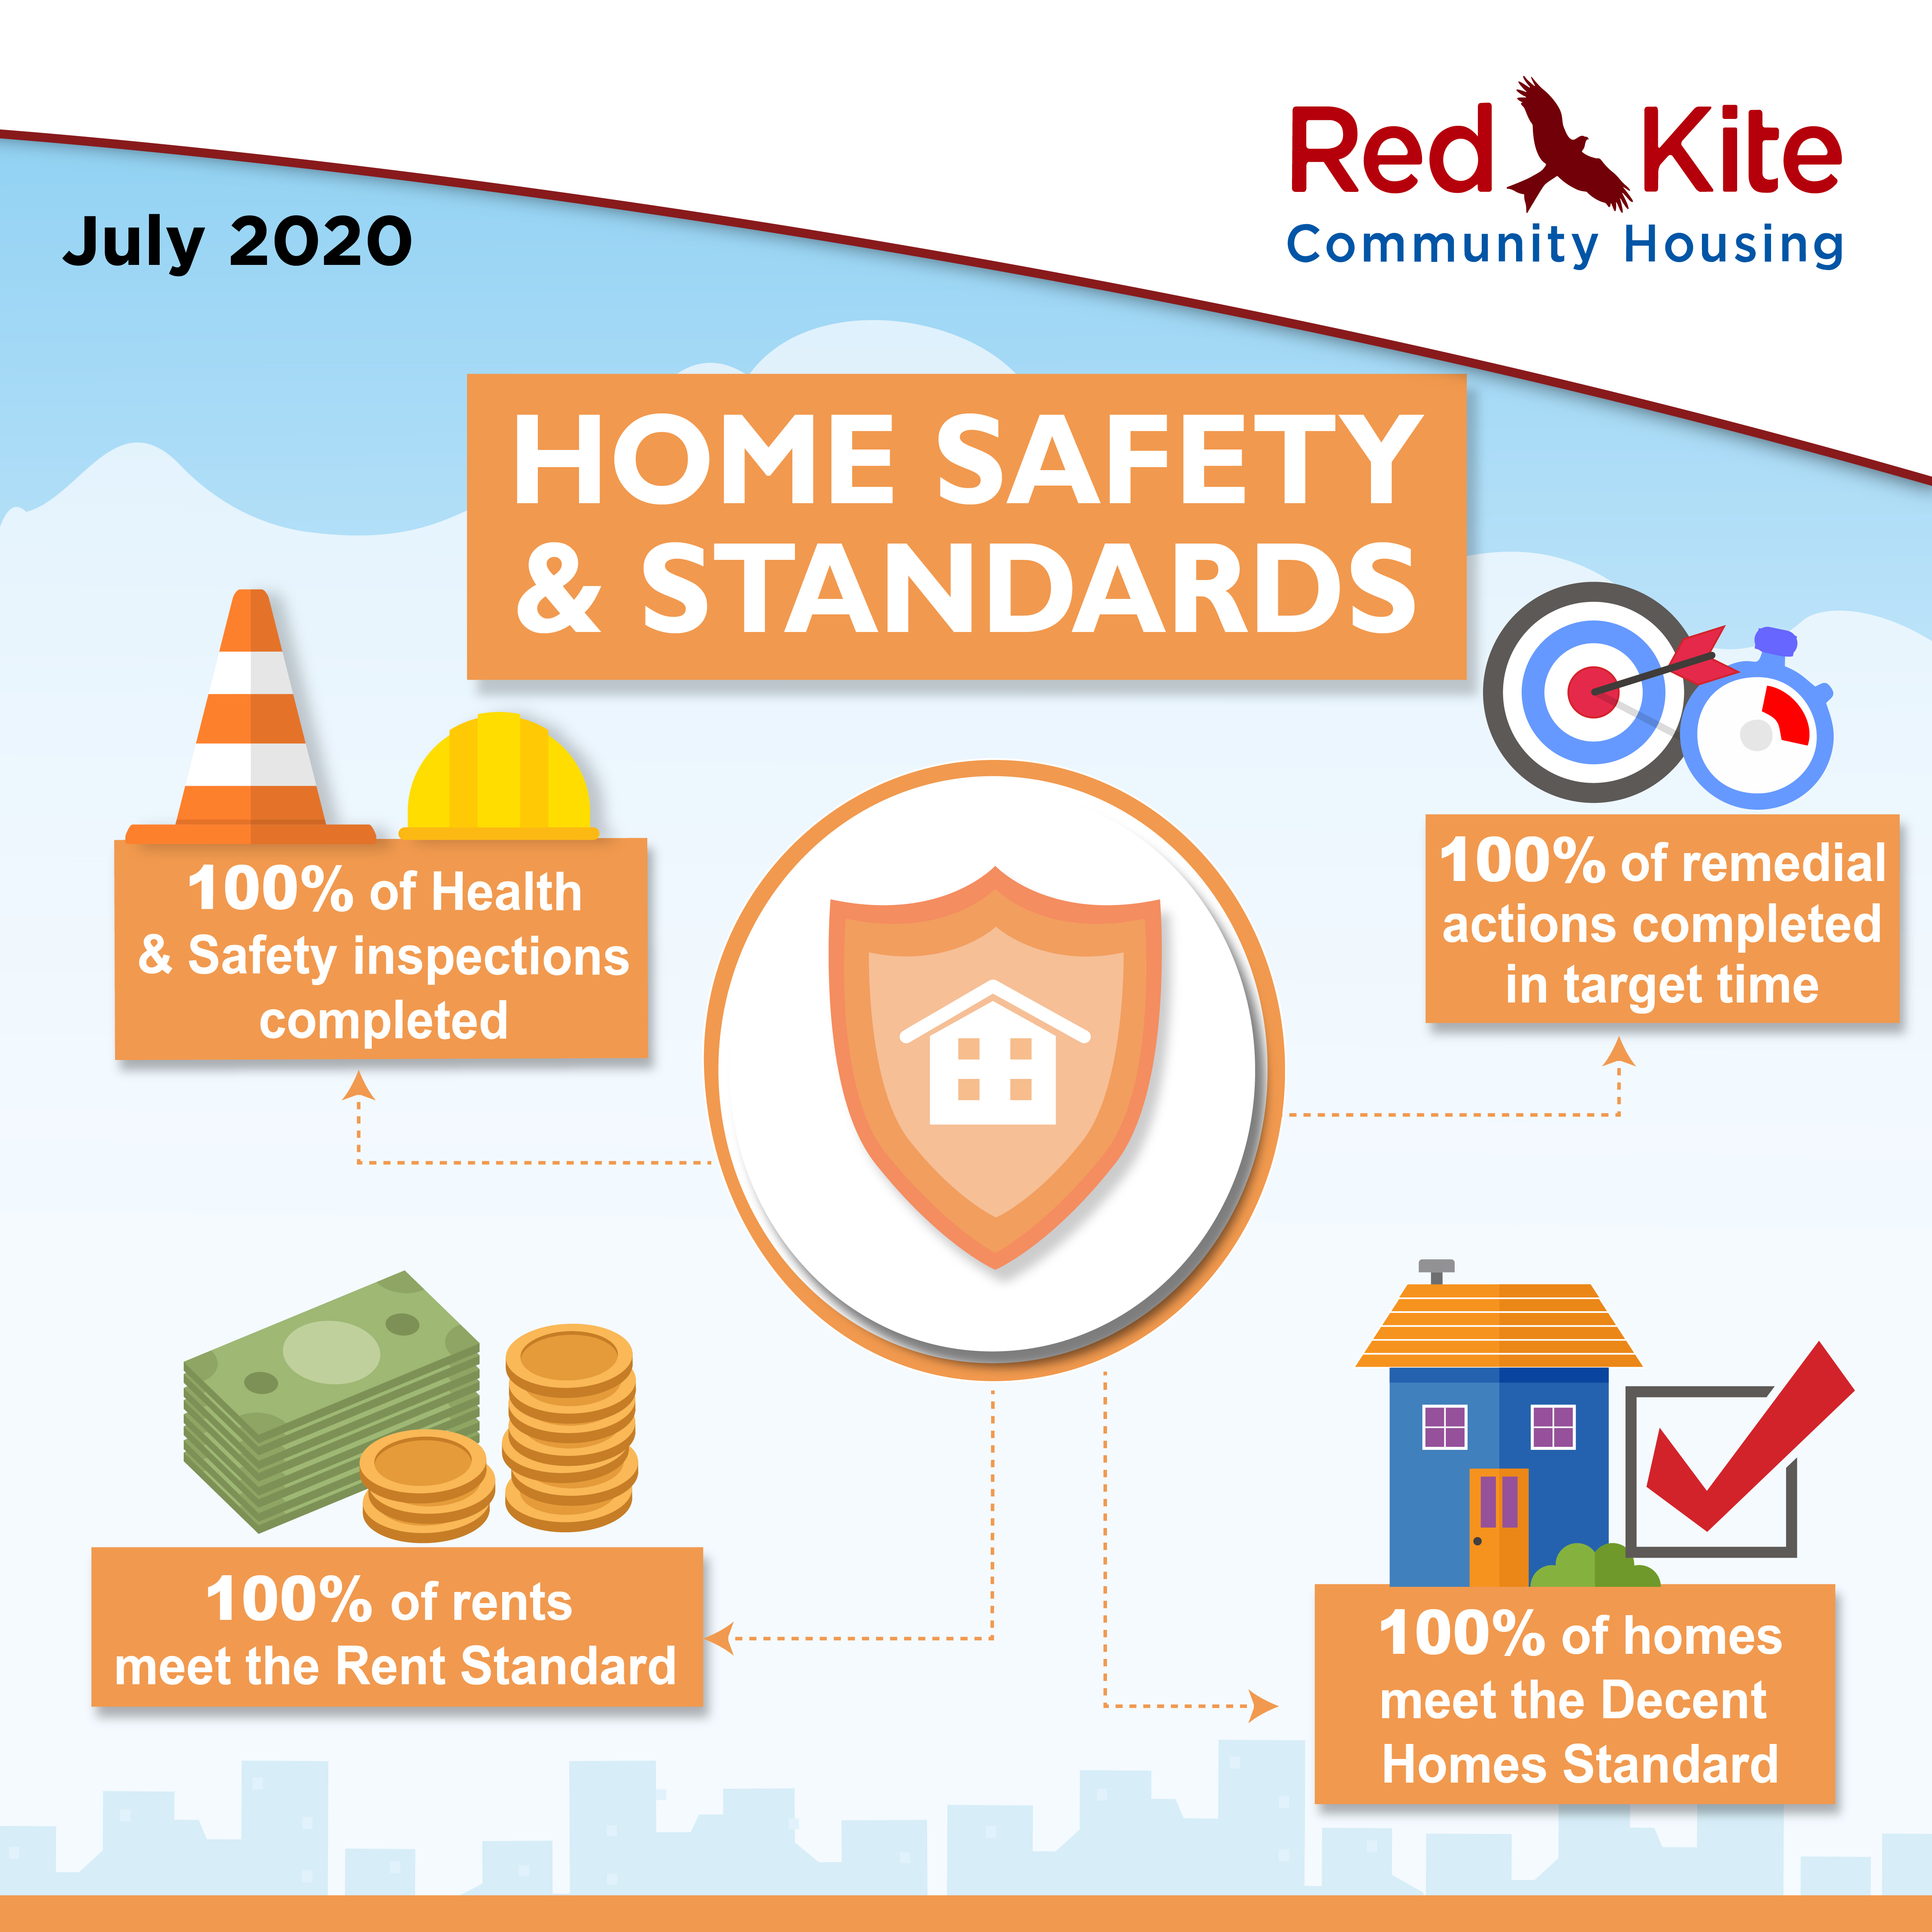 Home Safety & Standards Performance measures, July 2020 - 100% of Health & Safety inspections completed; 100% of remedial actions completed in target time; 100% of homes meet the Decent Homes Standard; 100% of rents meet the Rent Standard